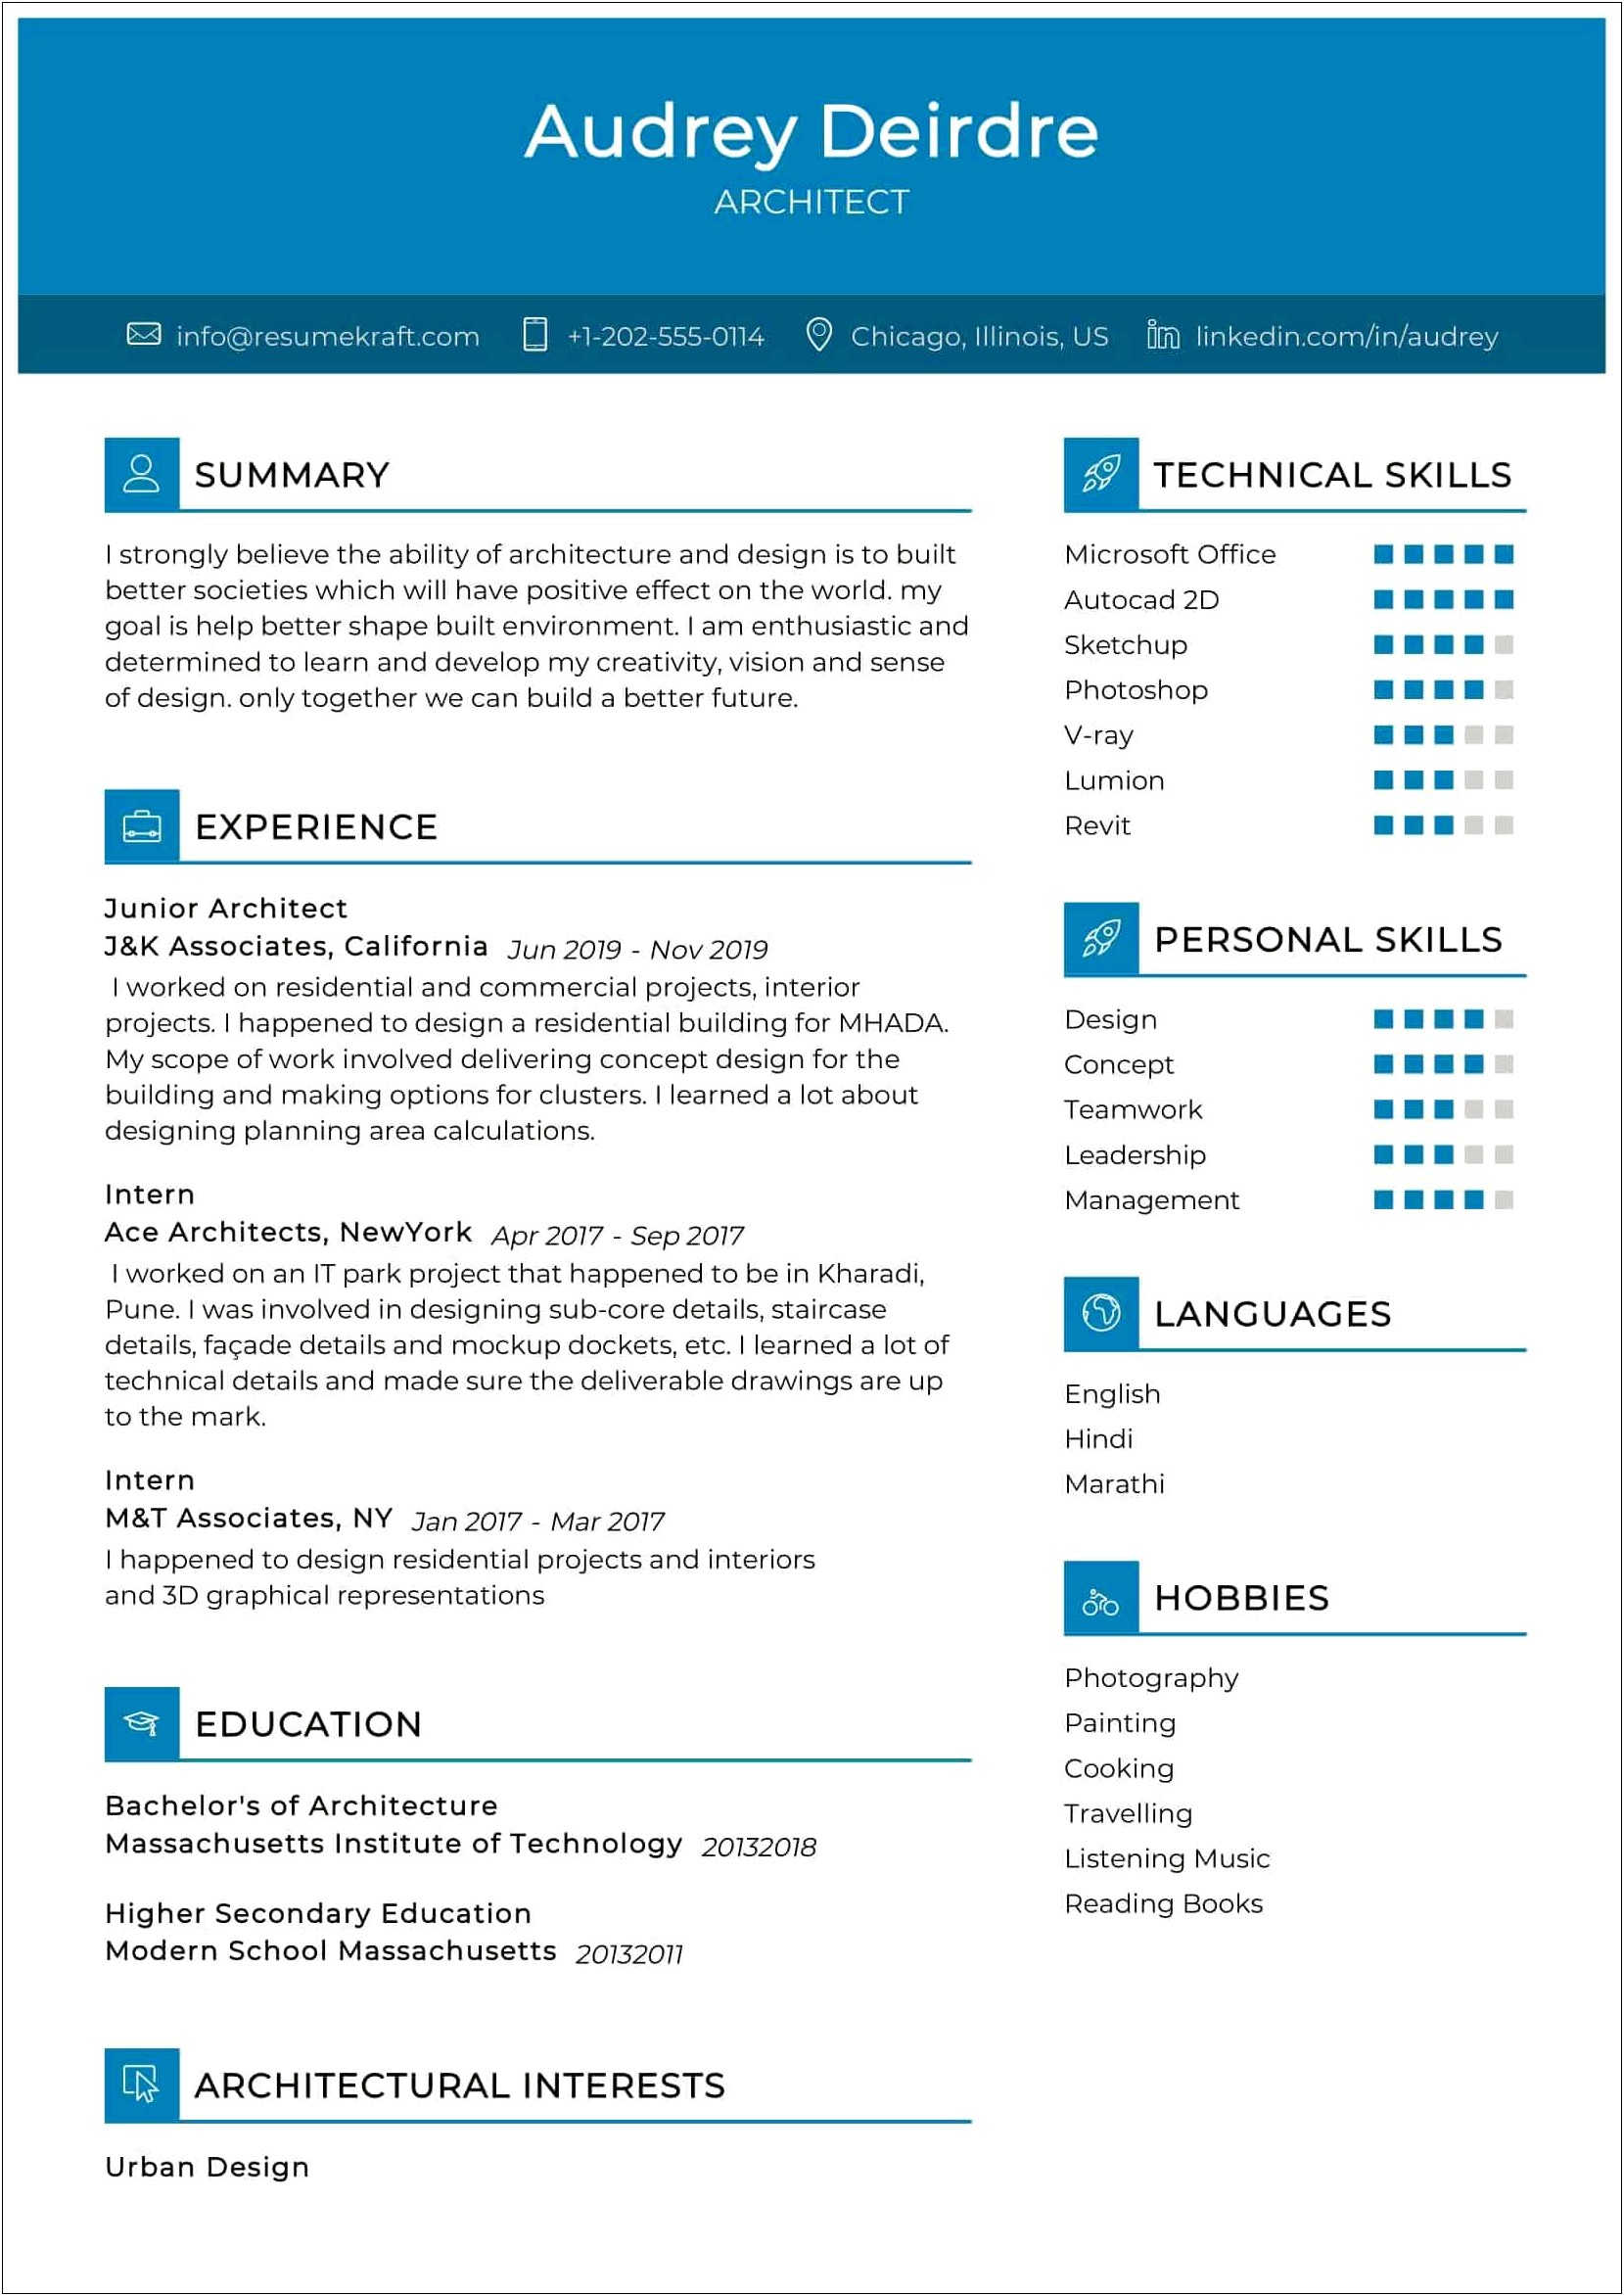 Computer Systems Engineers Architects Resume Sample